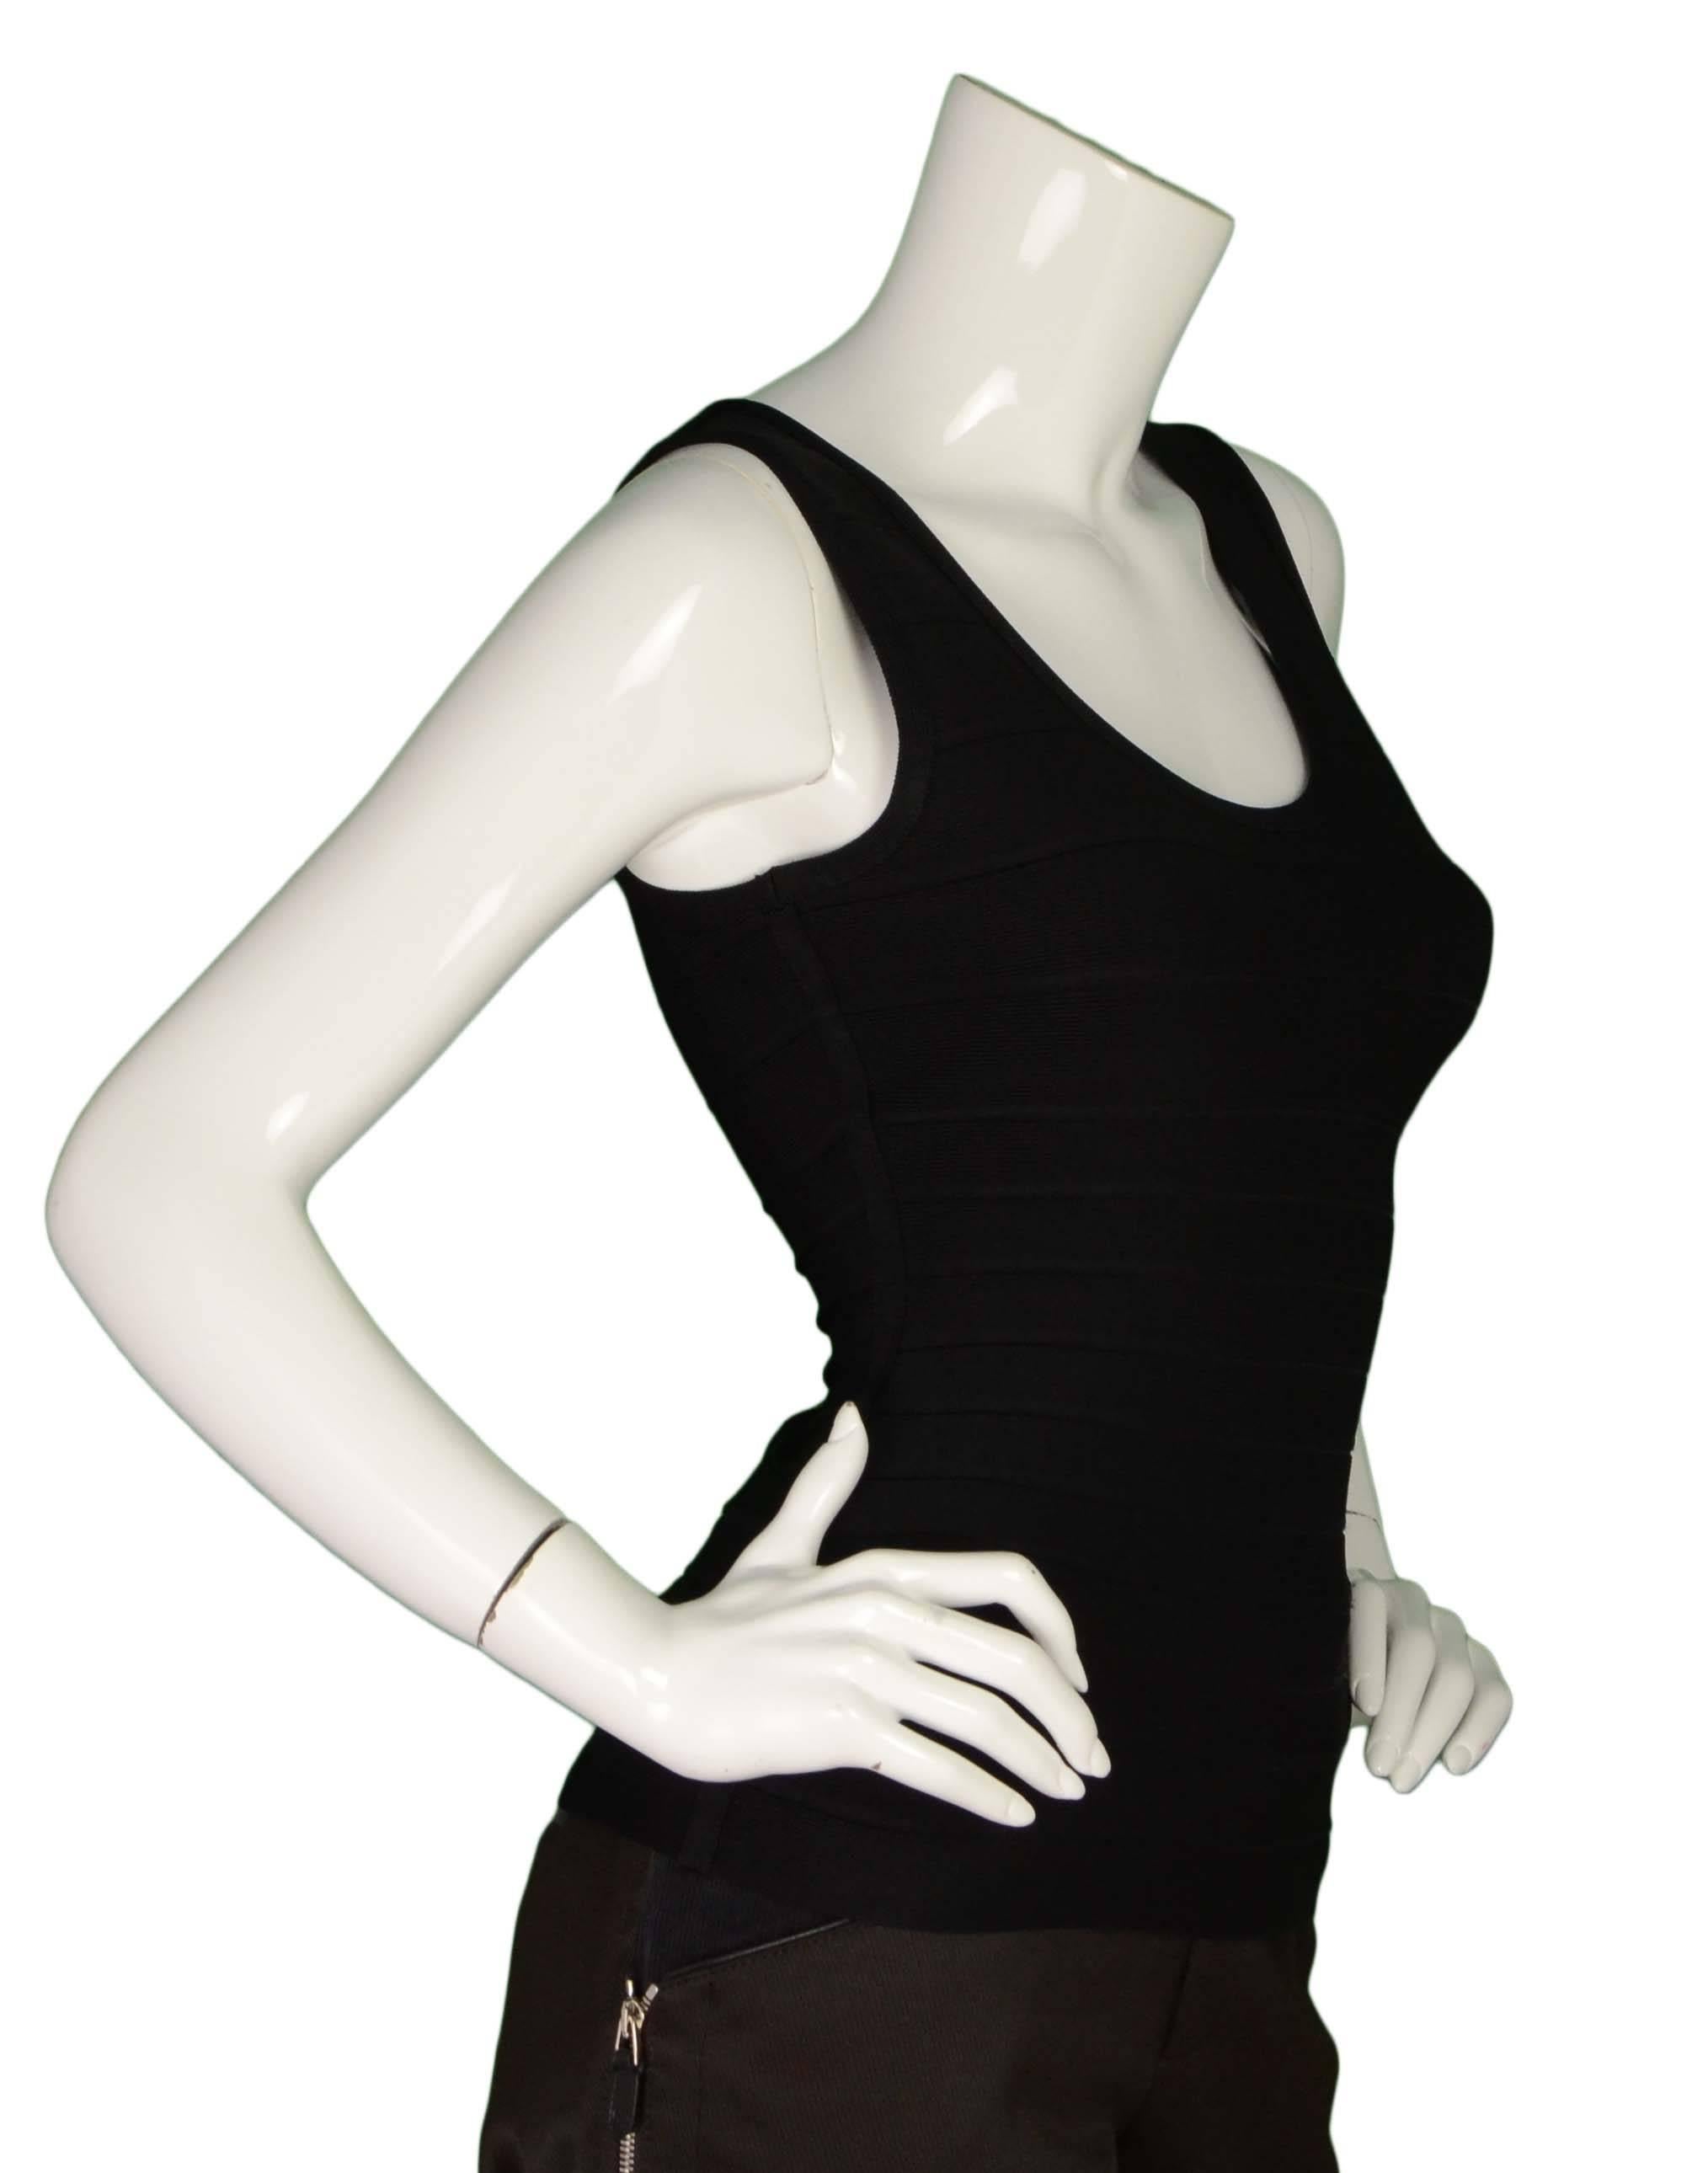 Herve Leger Black Sleeveless Bandage Top 
Features scoop neckline and back exposed zipper
Made In: China
Color: Black
Composition: 90% rayon, 9% nylon, 1% spandex
Lining: None
Closure/Opening: Back center zip up
Exterior Pockets: